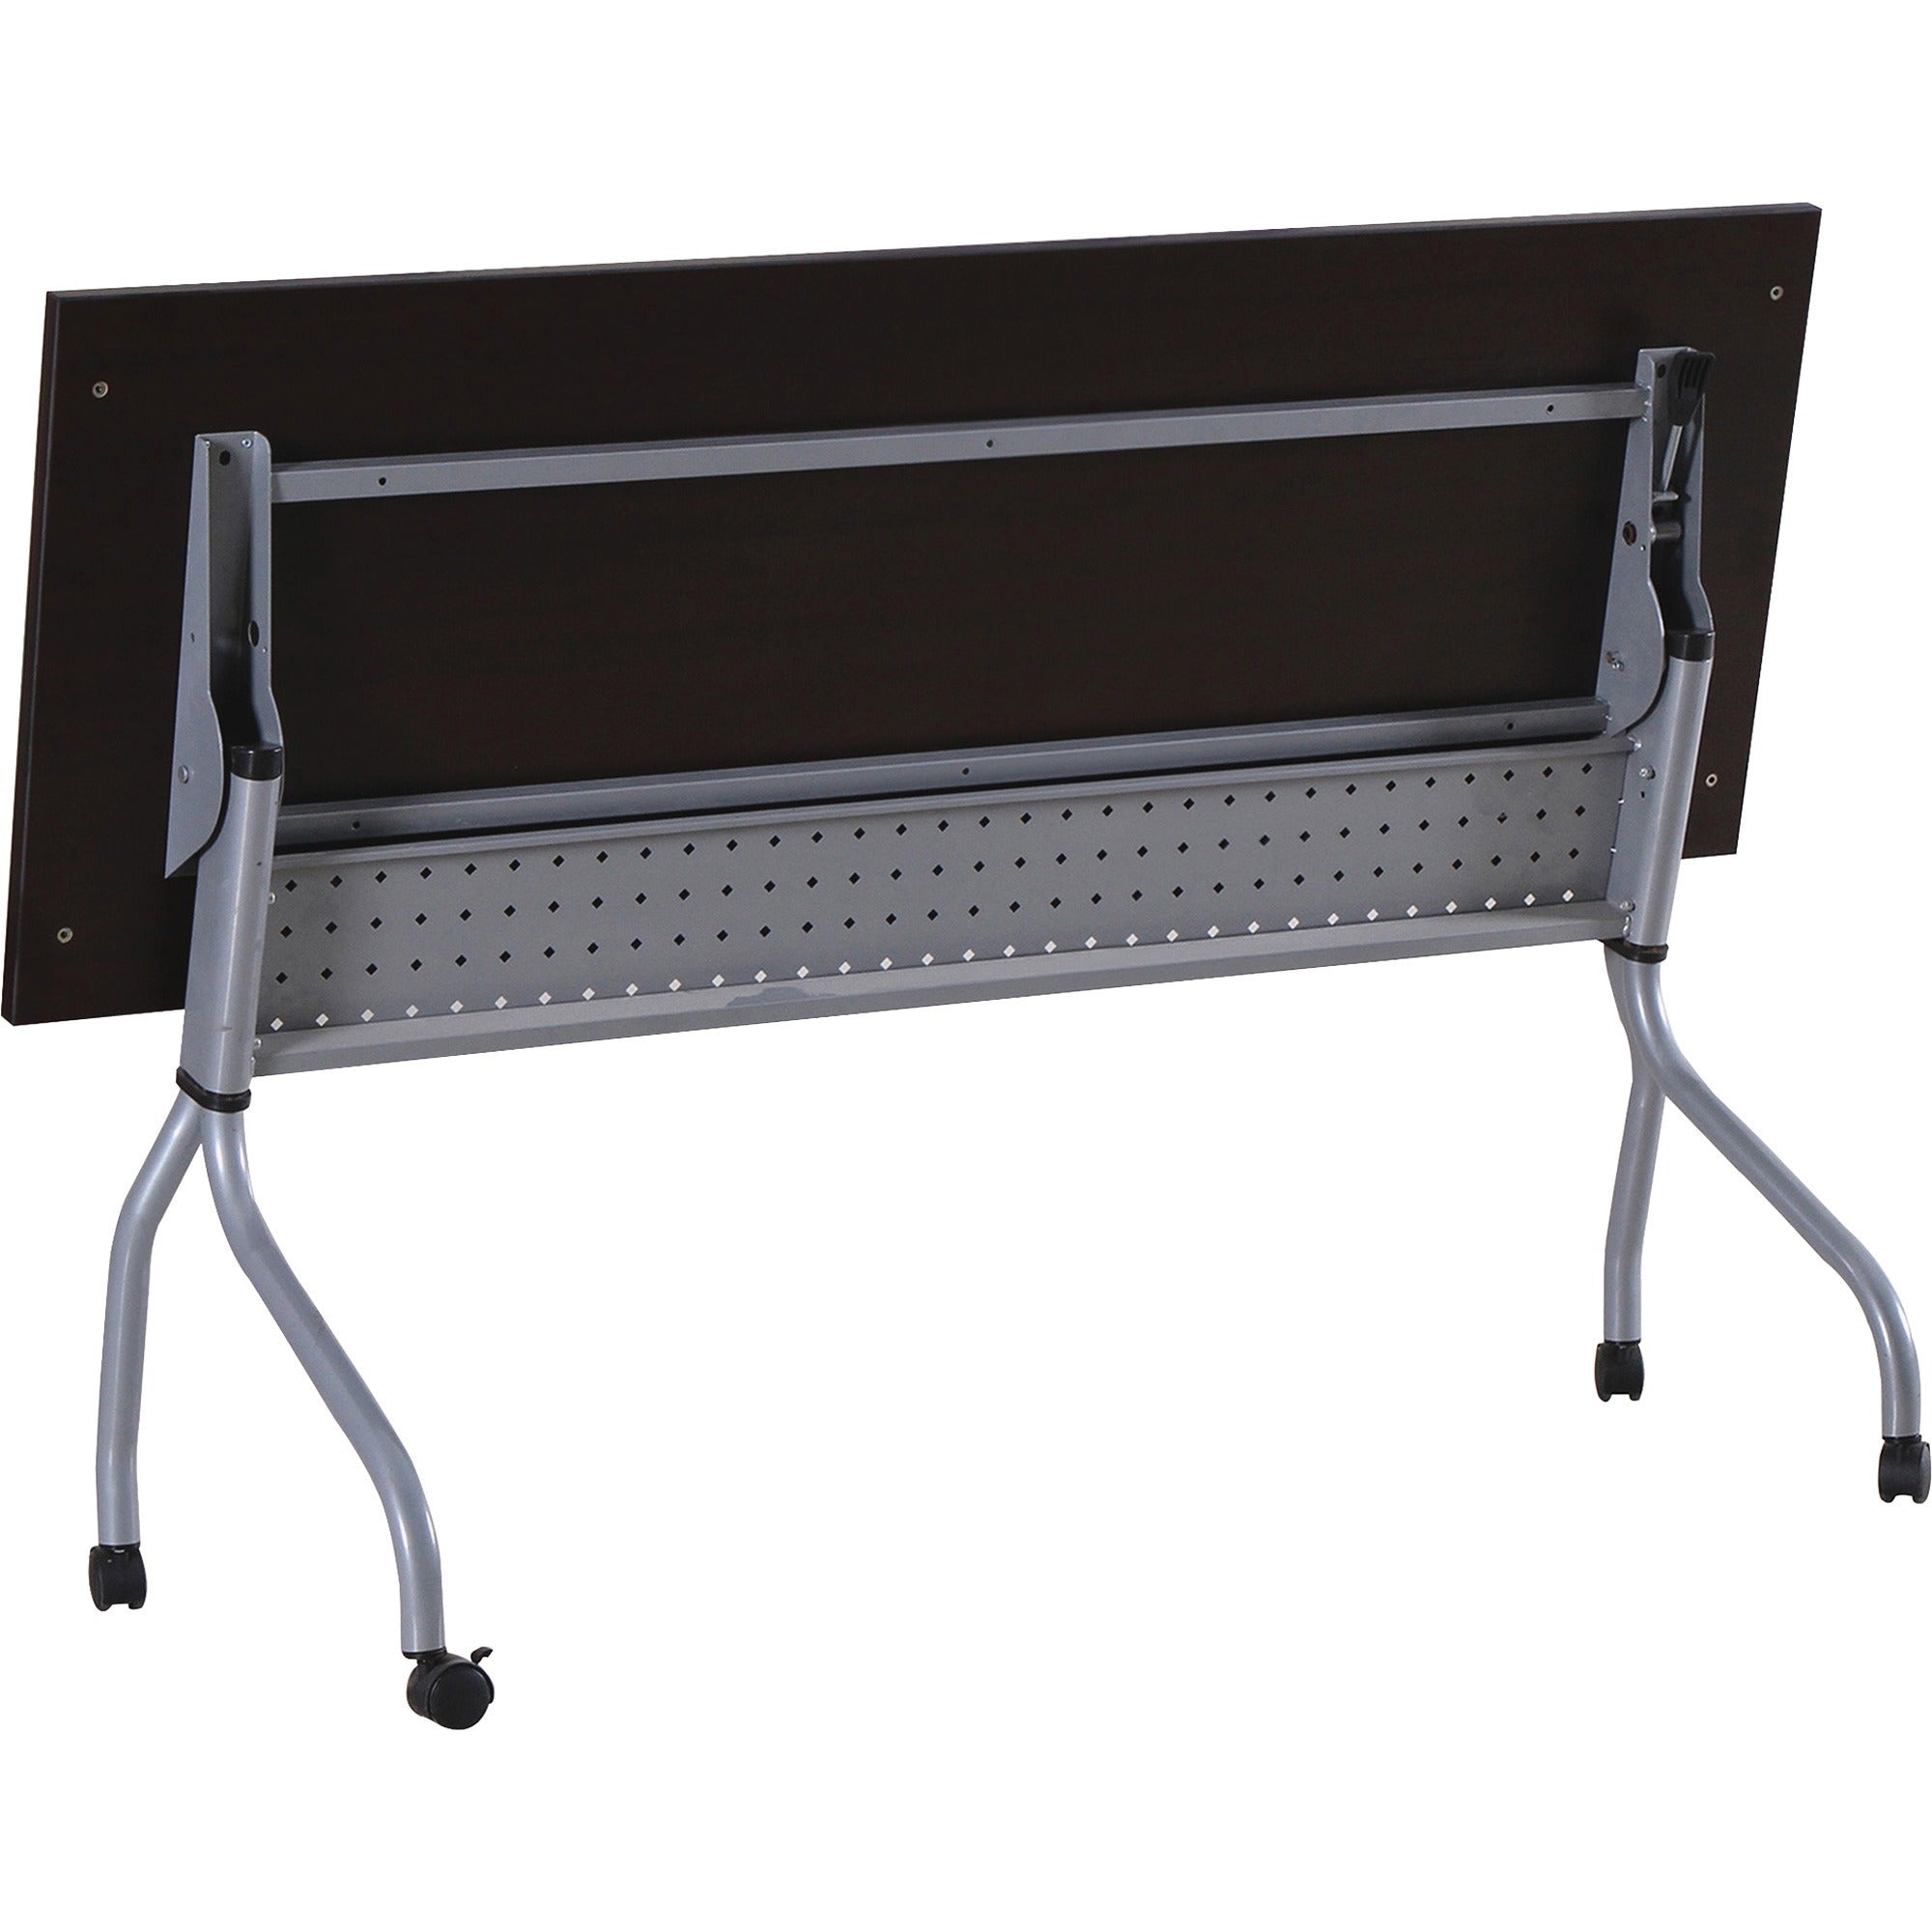 Lorell Flip Top Training Table - For - Table TopRectangle Top - Four Leg Base - 4 Legs x 72" Table Top Width x 23.50" Table Top Depth - 29.50" Height x 70.88" Width x 23.63" Depth - Assembly Required - Espresso, Silver - Melamine, Nylon - 1 Each - 